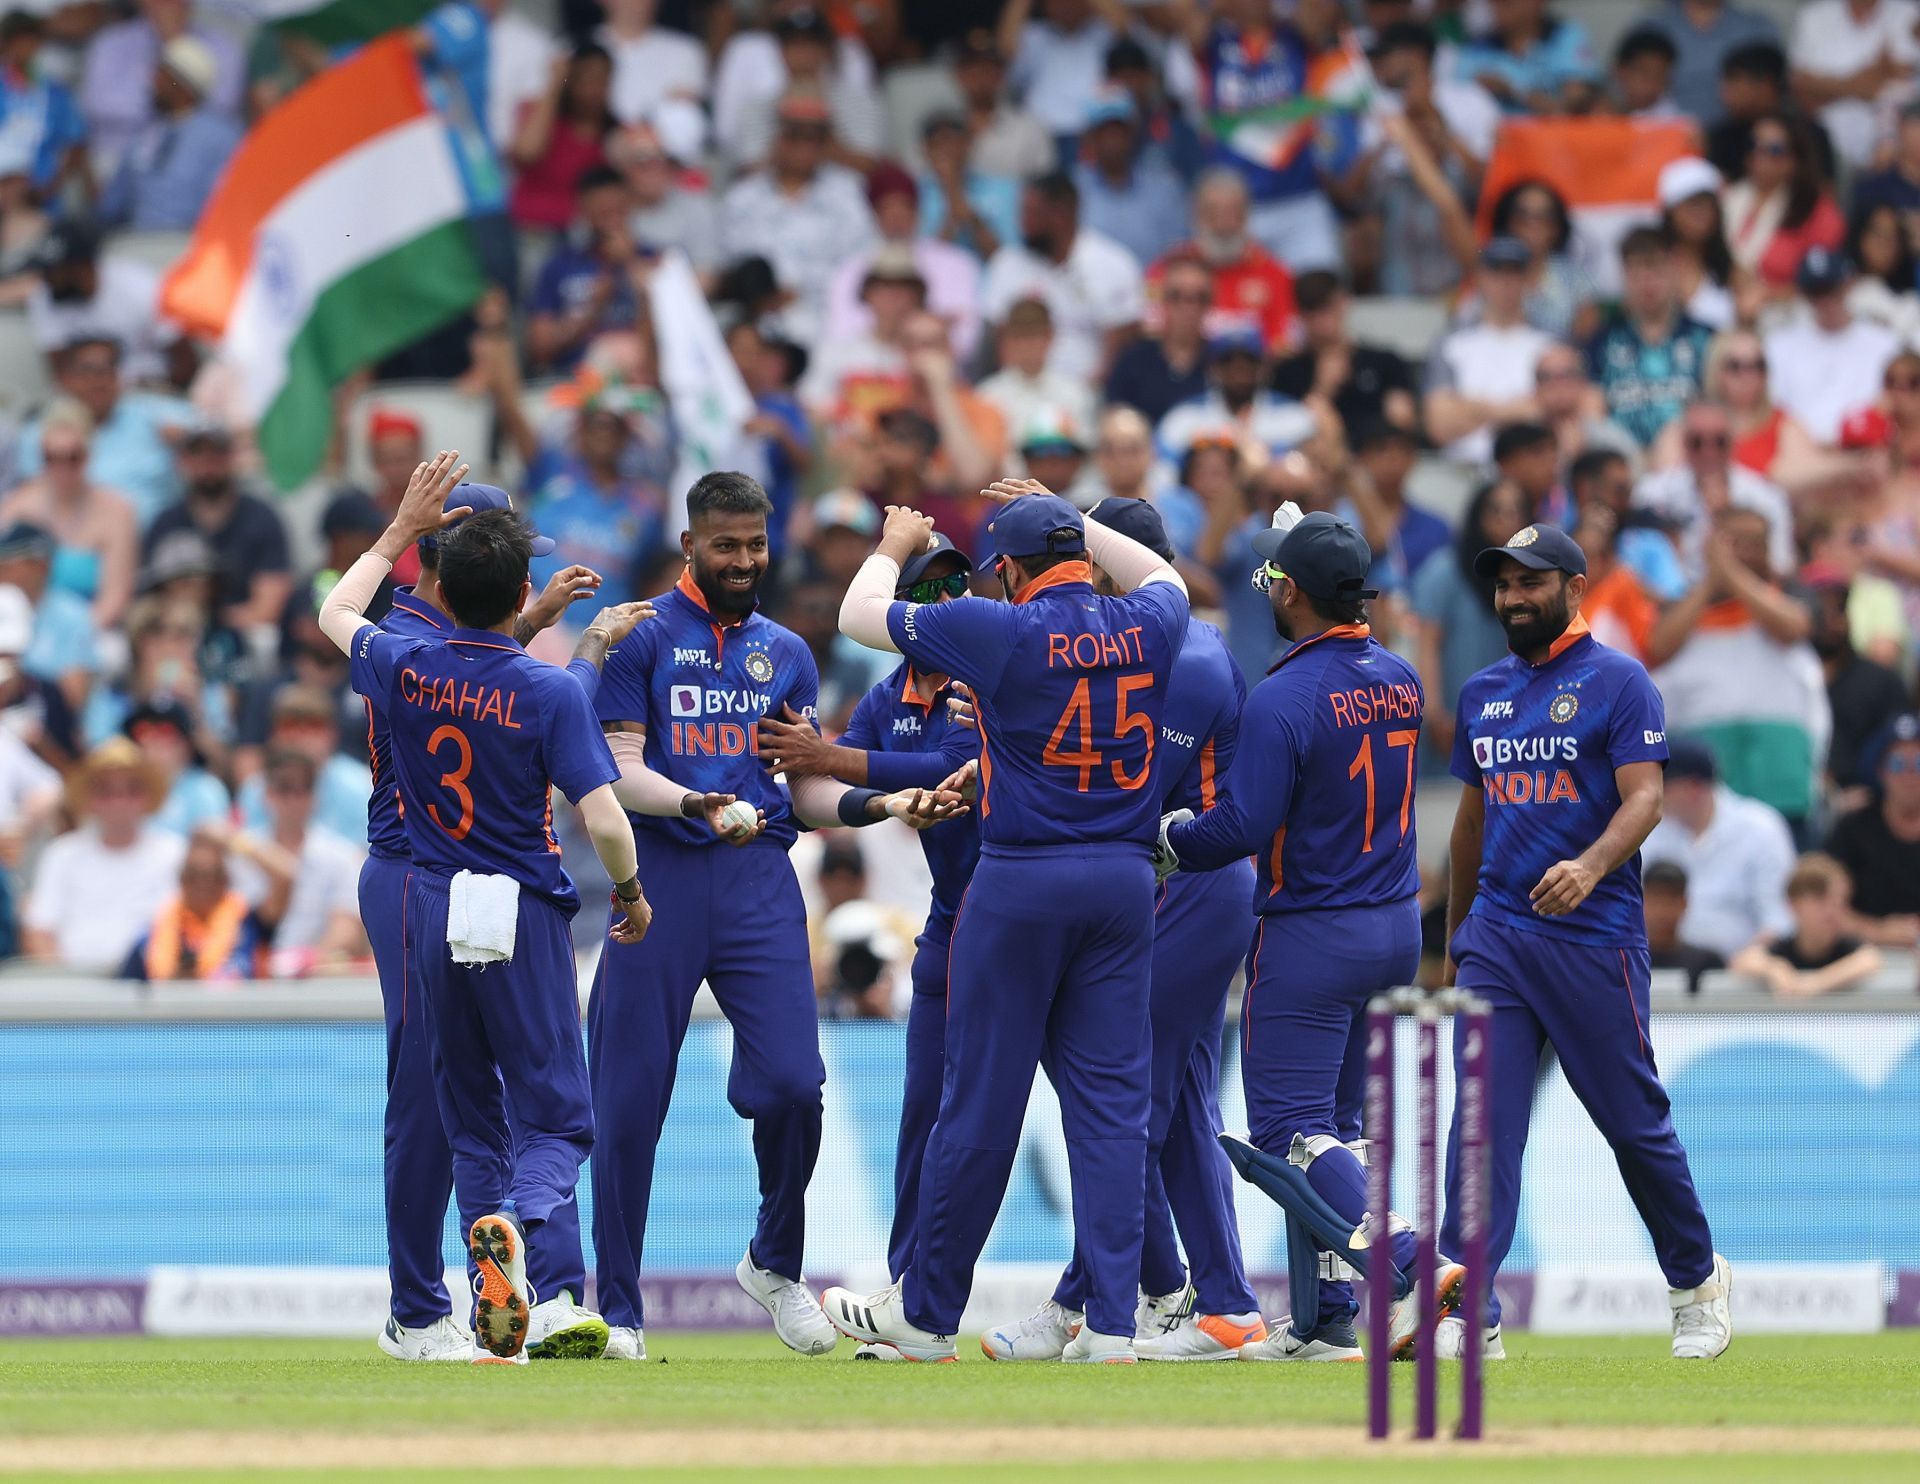 The Men in Blue during the ODI series in England. Pic: Getty Images